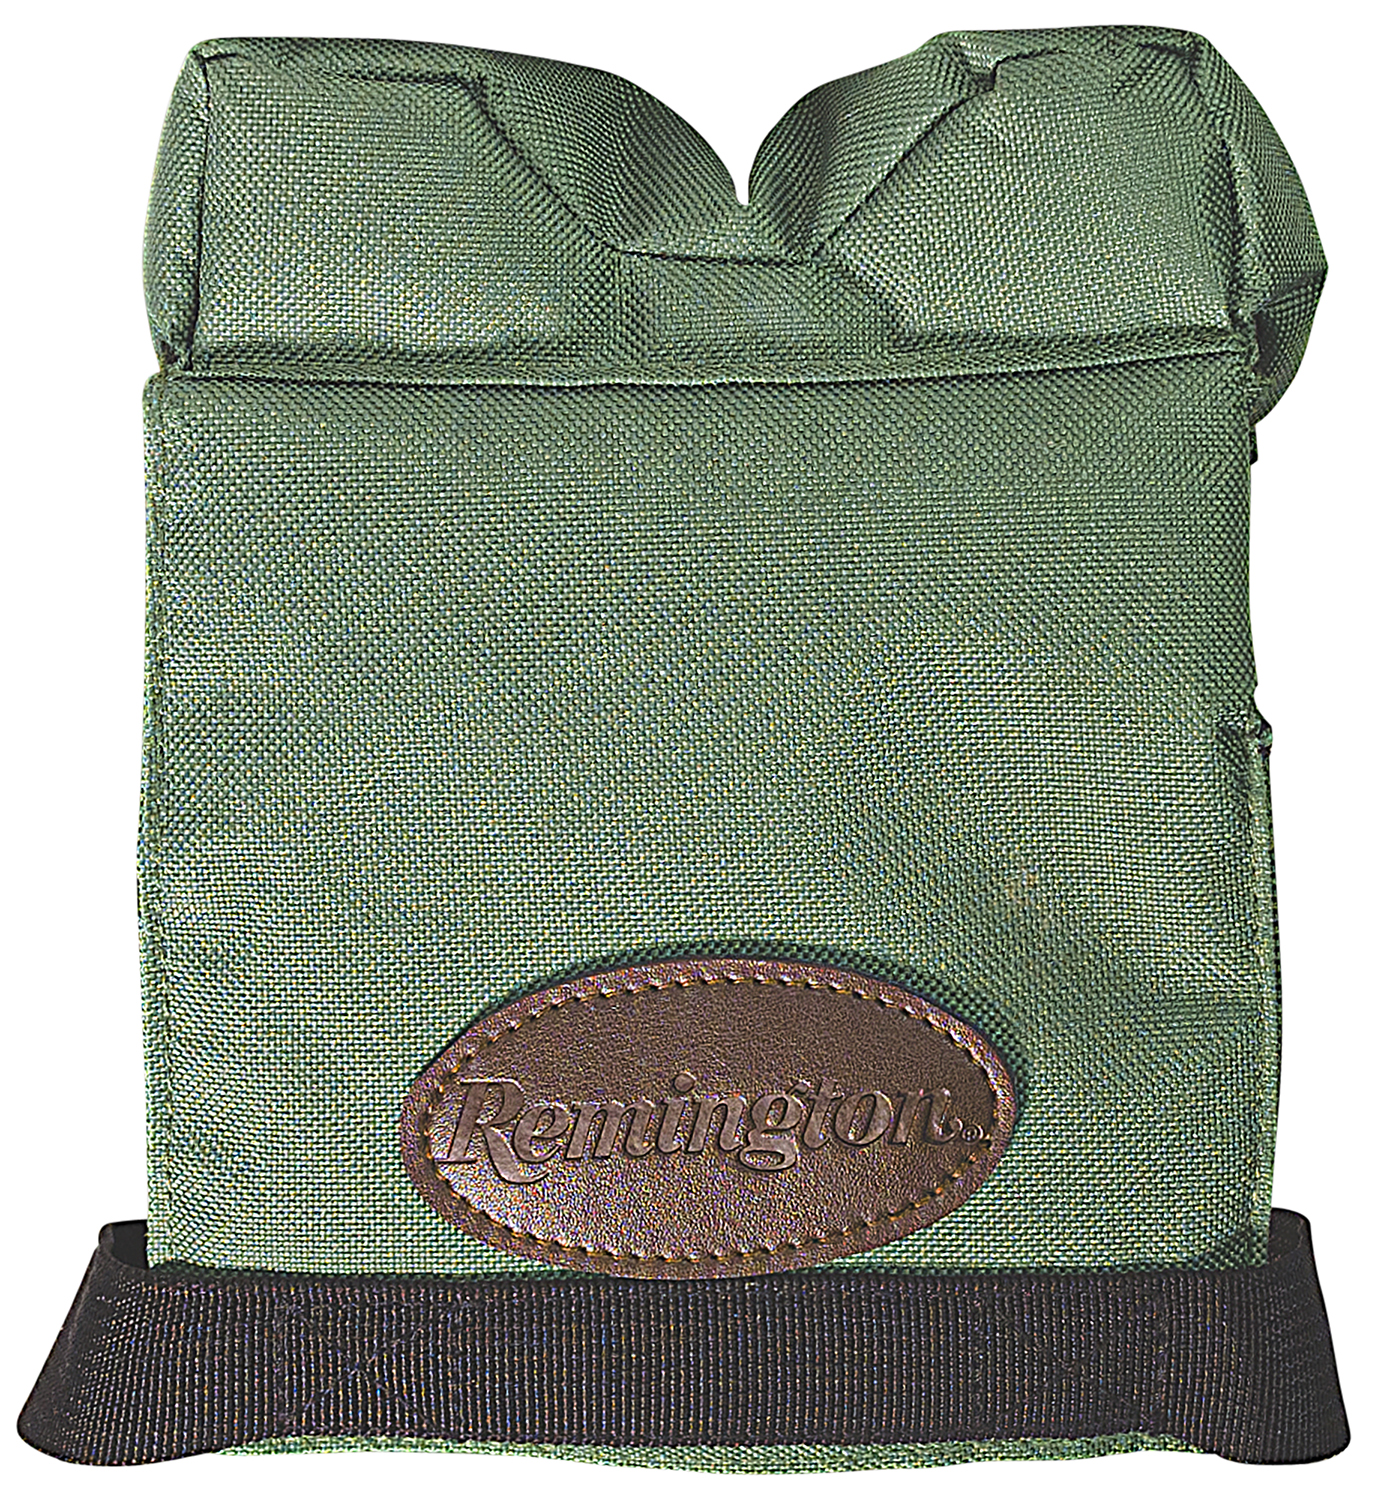 Remington Accessories 15802 Hunting Blind Shooters Bag Green Cordura, Velcro Straps